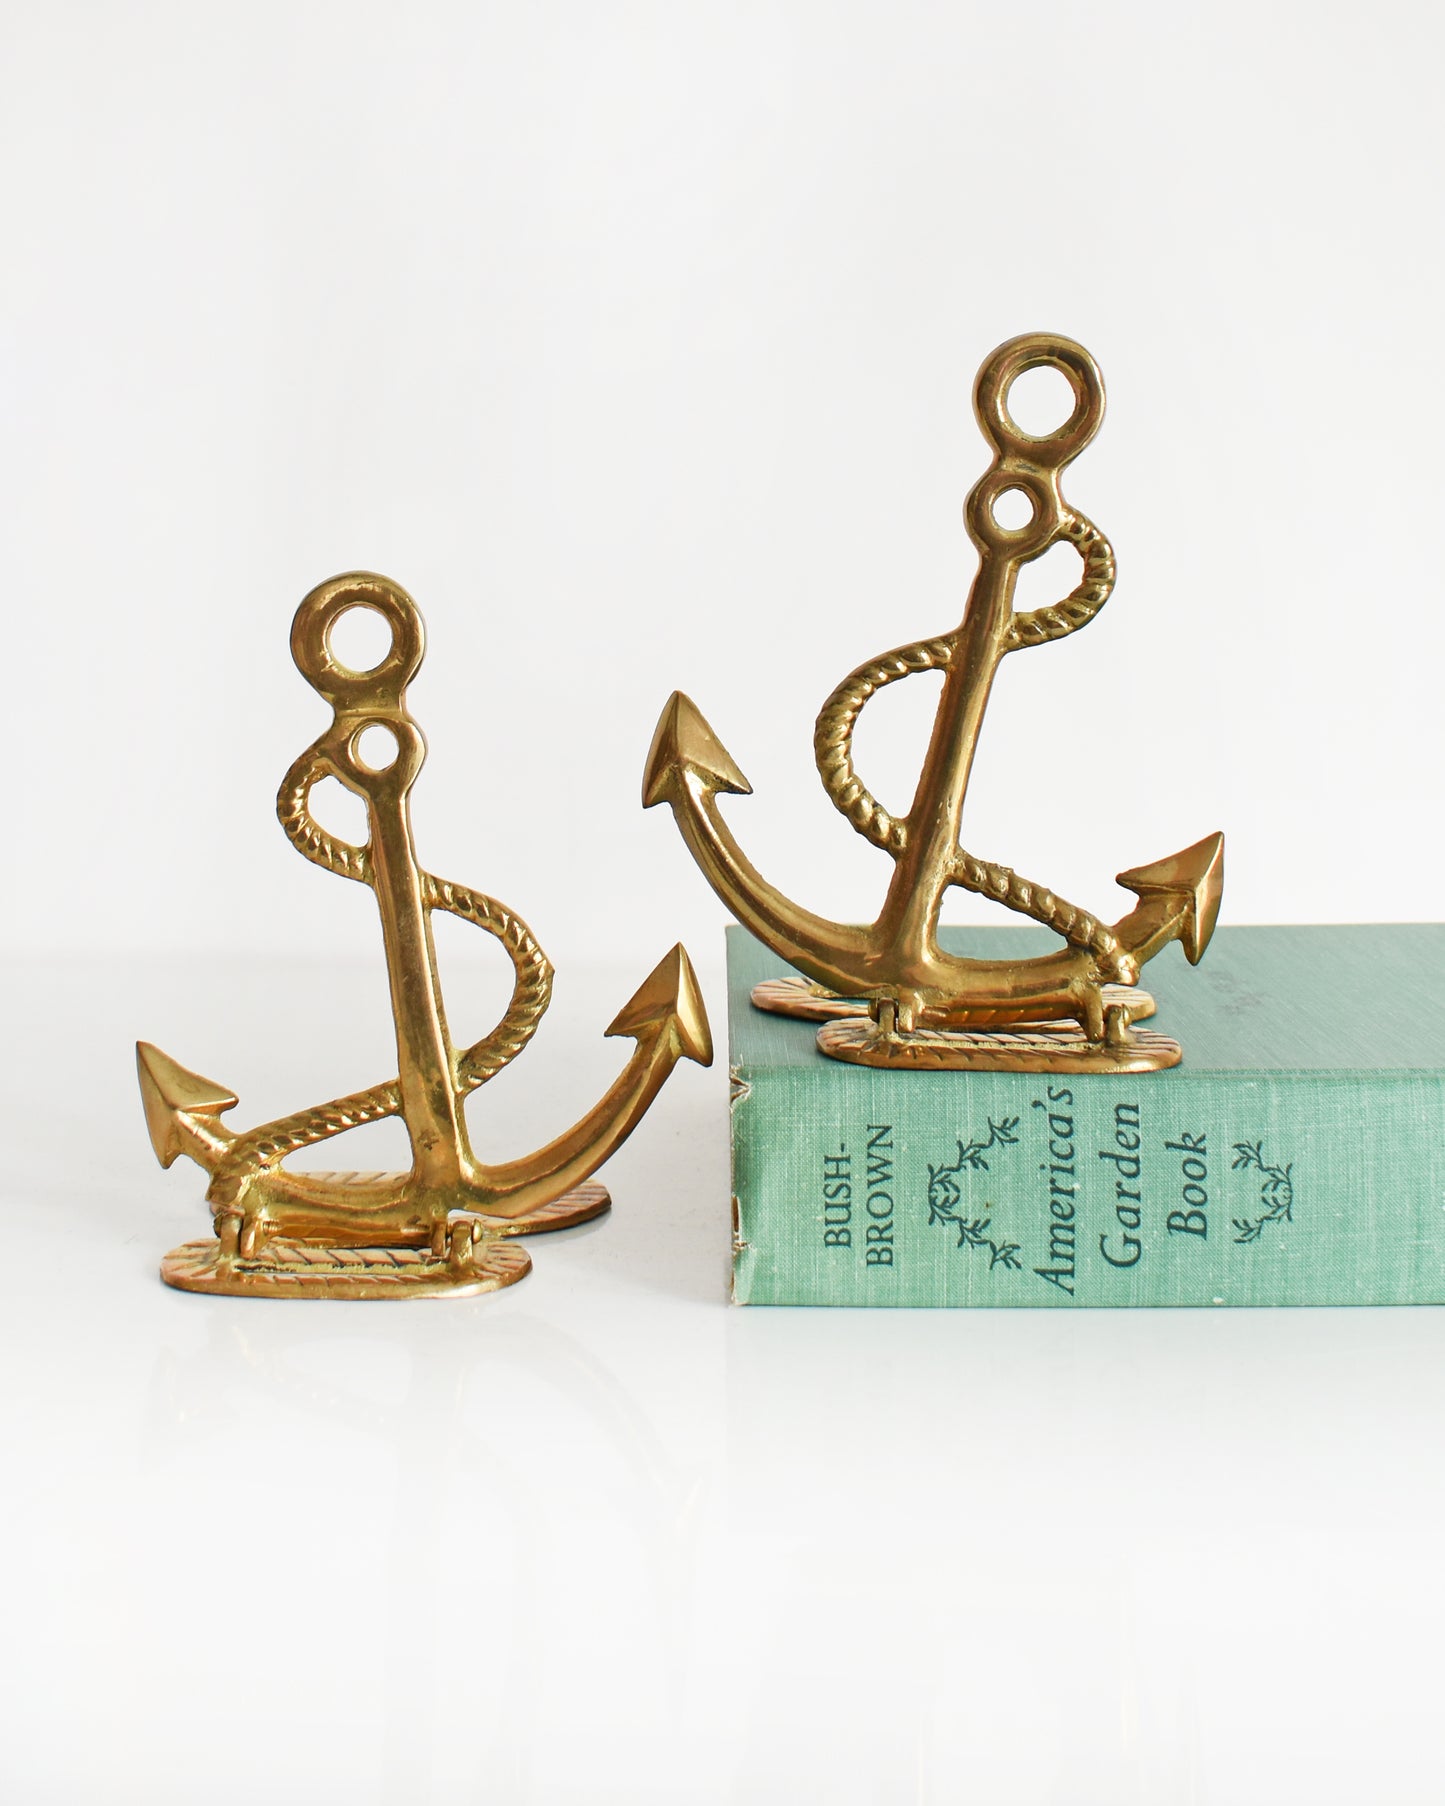 Two vintage brass anchor and rope bookends. One of the bookends is on a green book